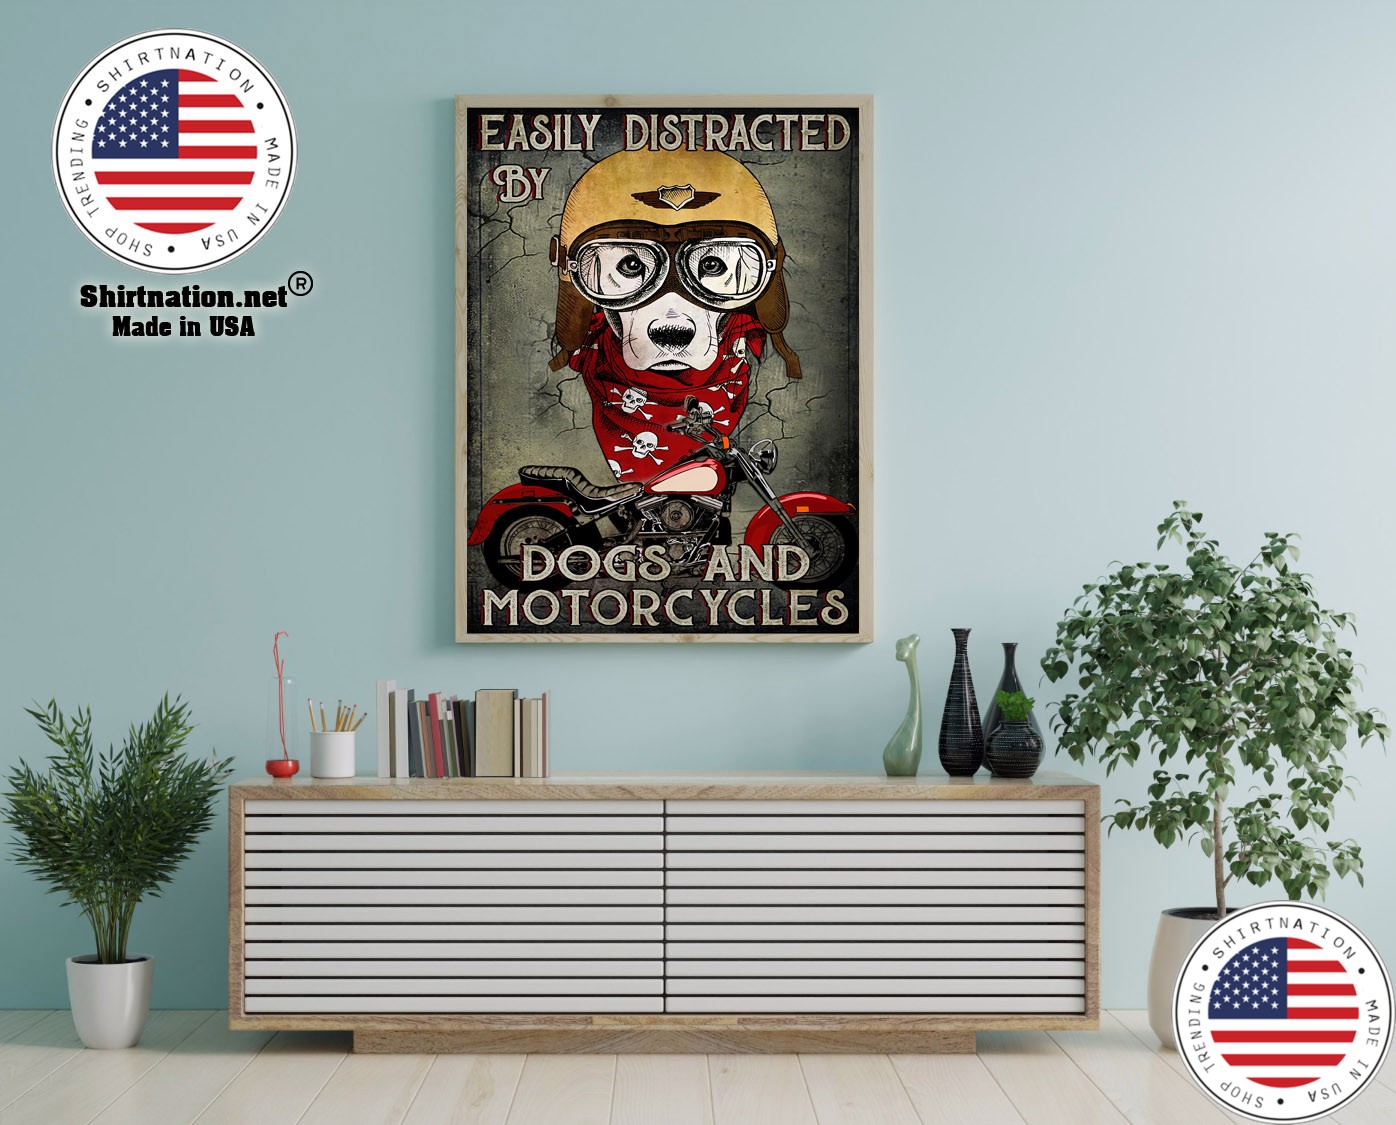 Easily distracted by dogs and motorcycles poster 12